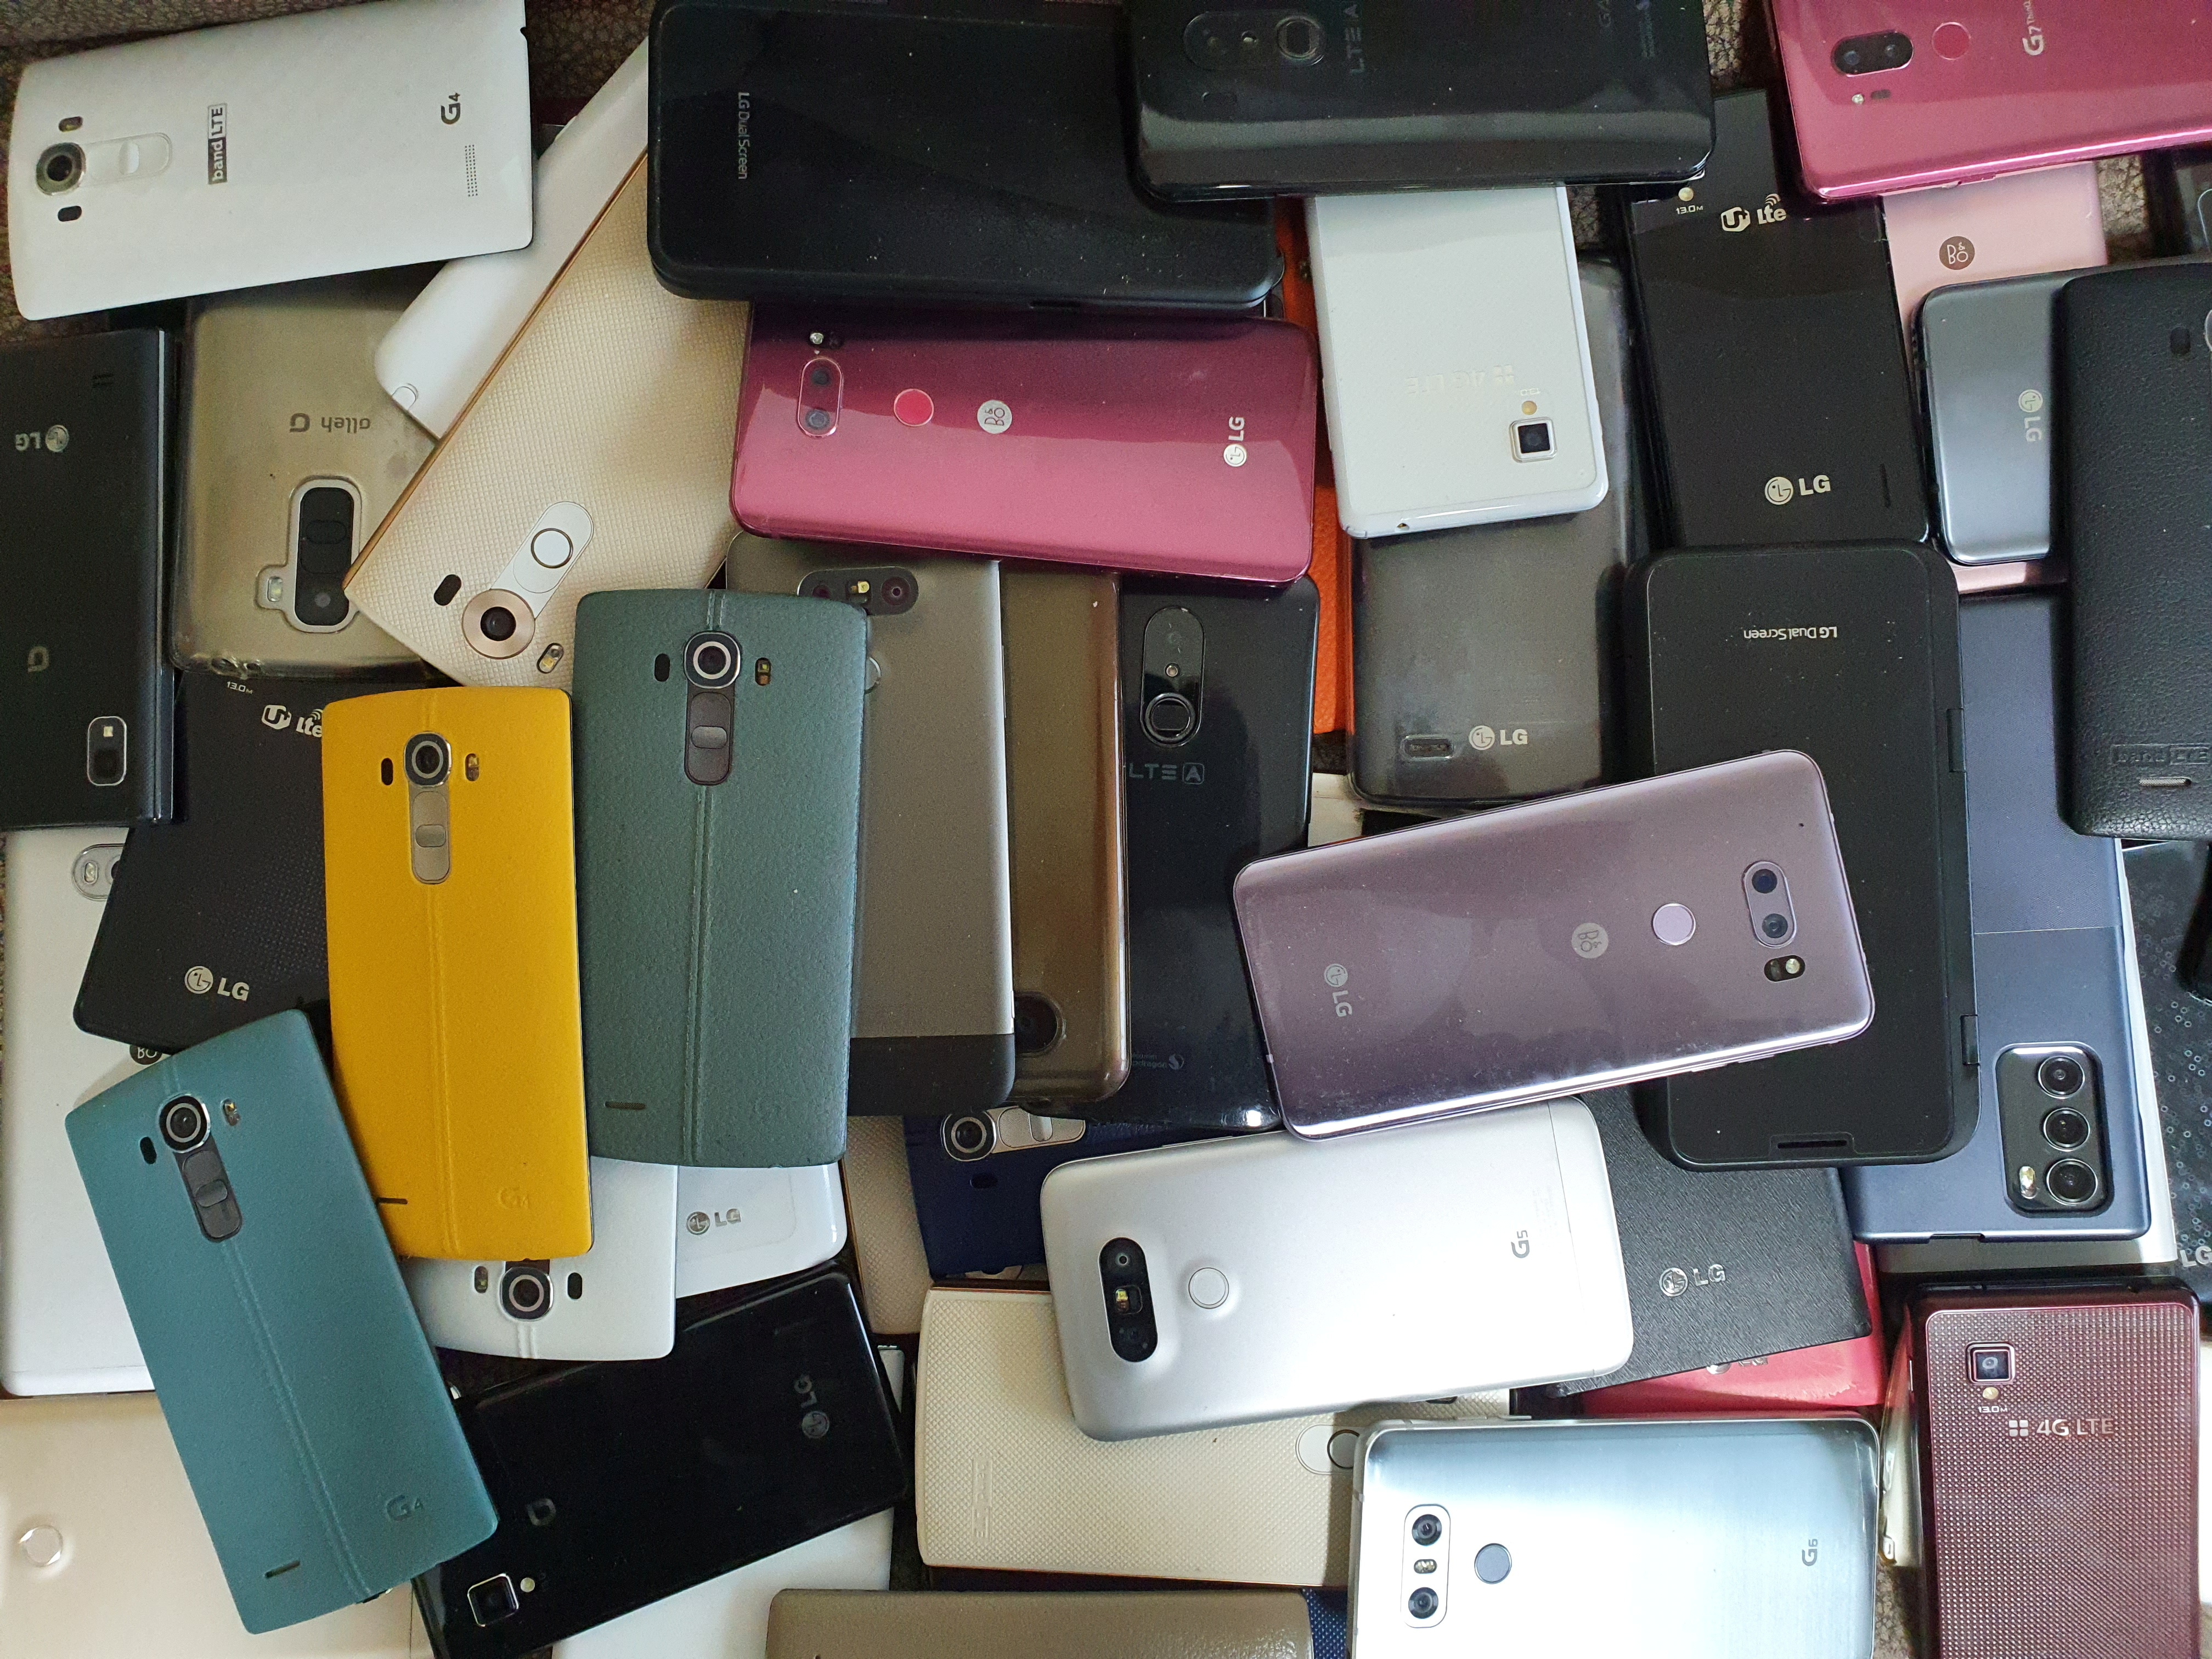  LG phones are piled up in, in Anyang, South Korea April 12, 2021. REUTERS/Daewoung Kim